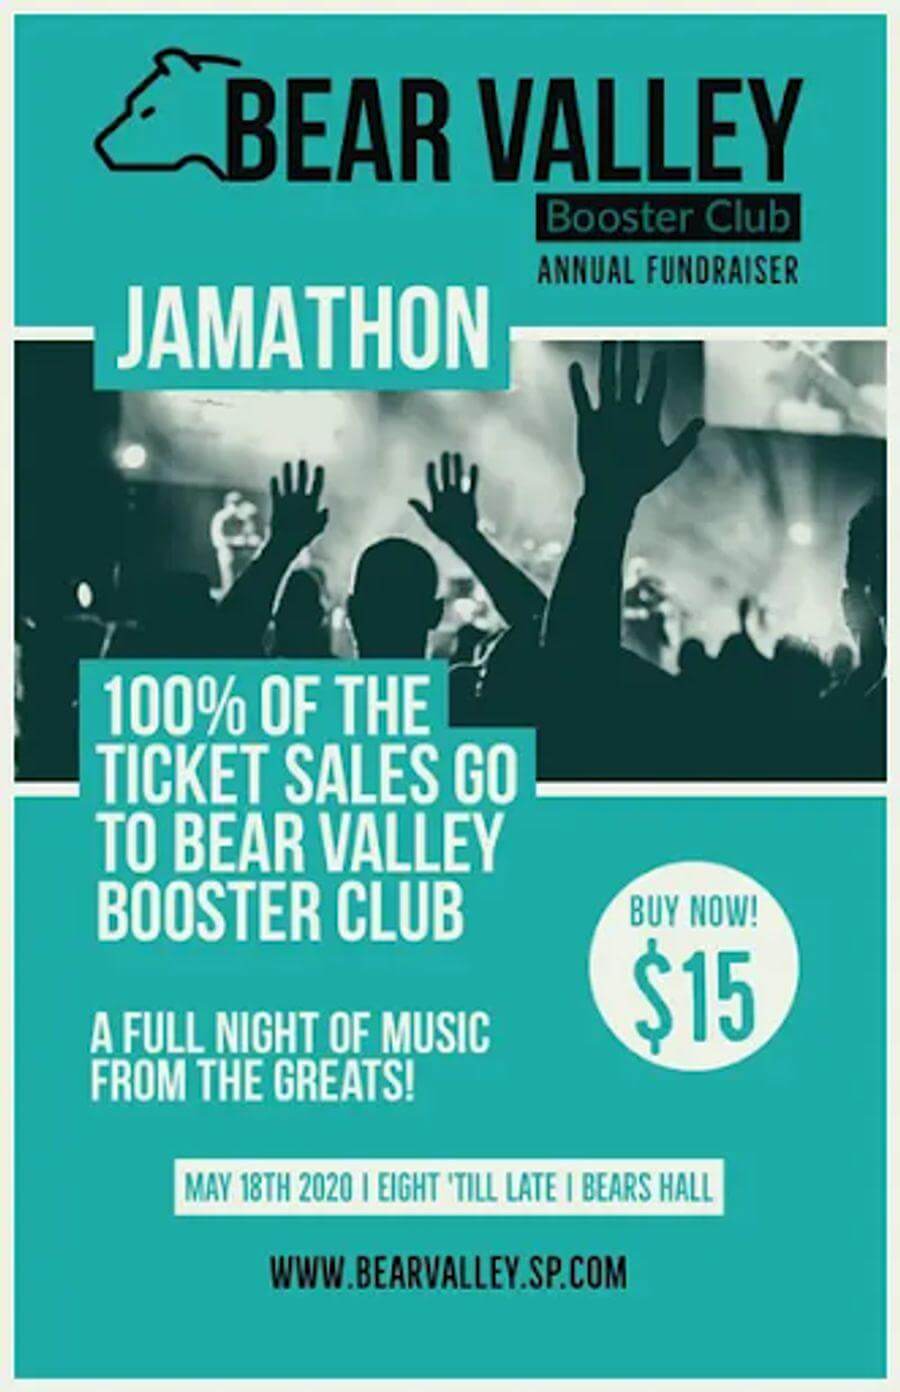 Bear Valley's fundraising flyer infuses clear branding.